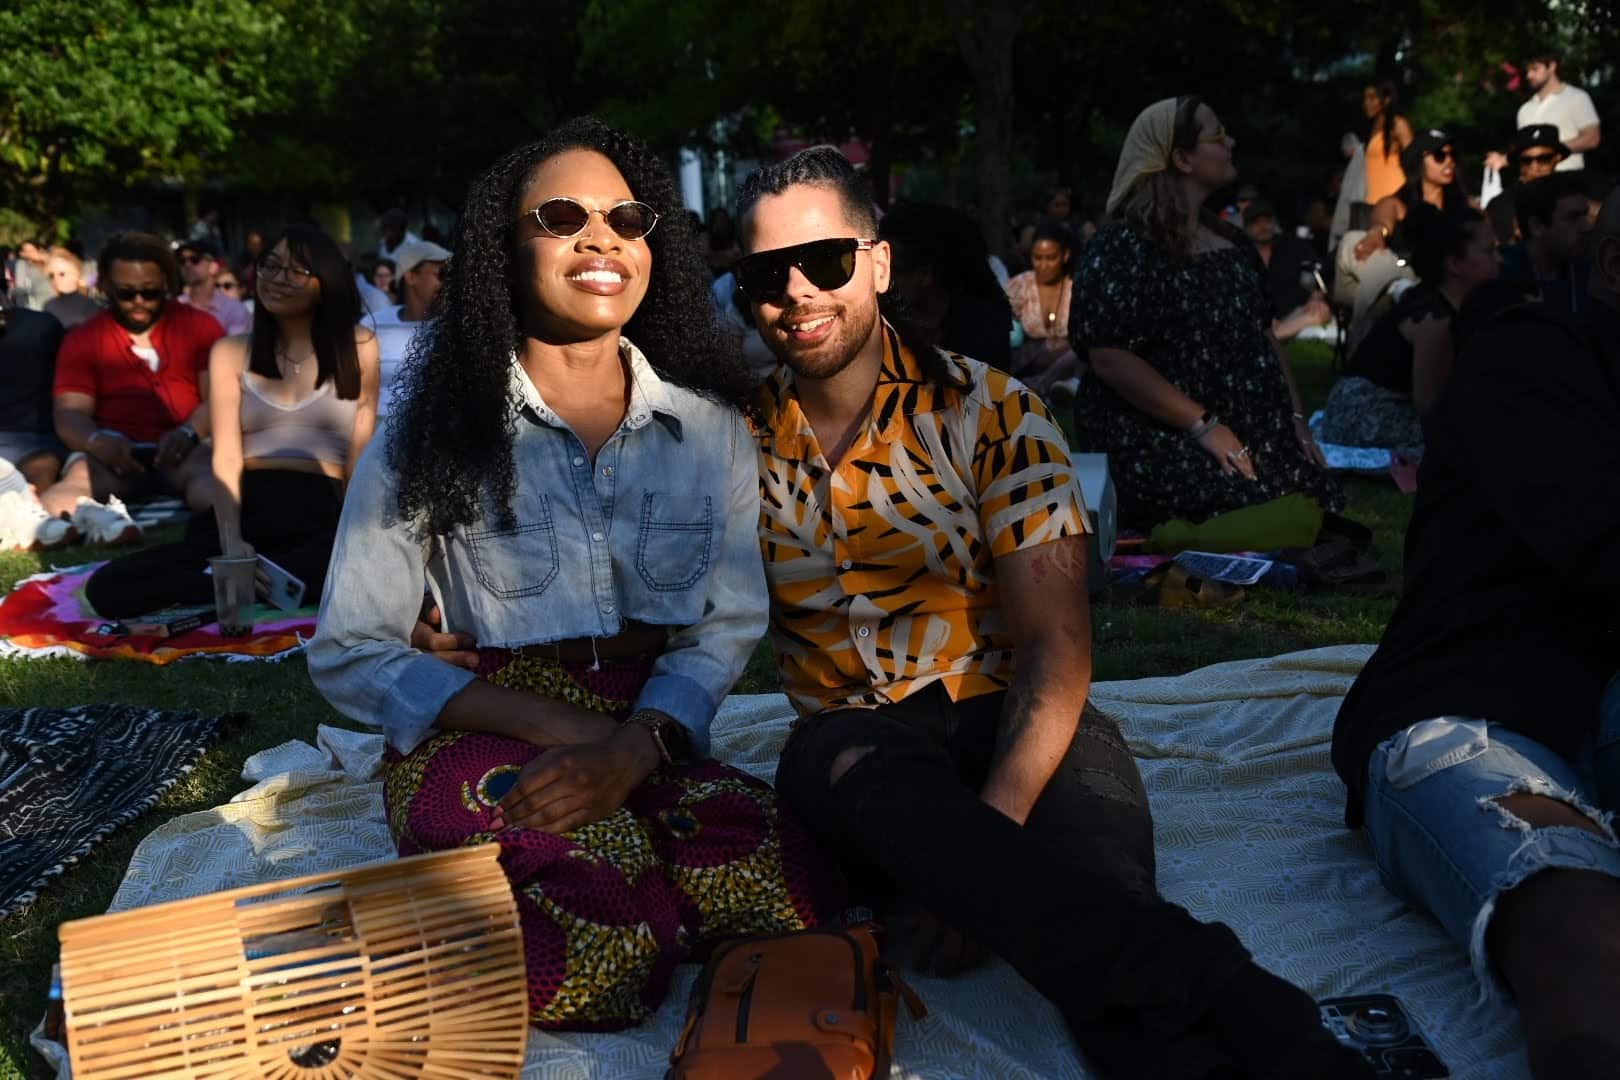 Houstonians are seen enjoying a Jazzy Sundays concert with Jason Moran at Discovery Green. Photo by Jamaal Ellis.